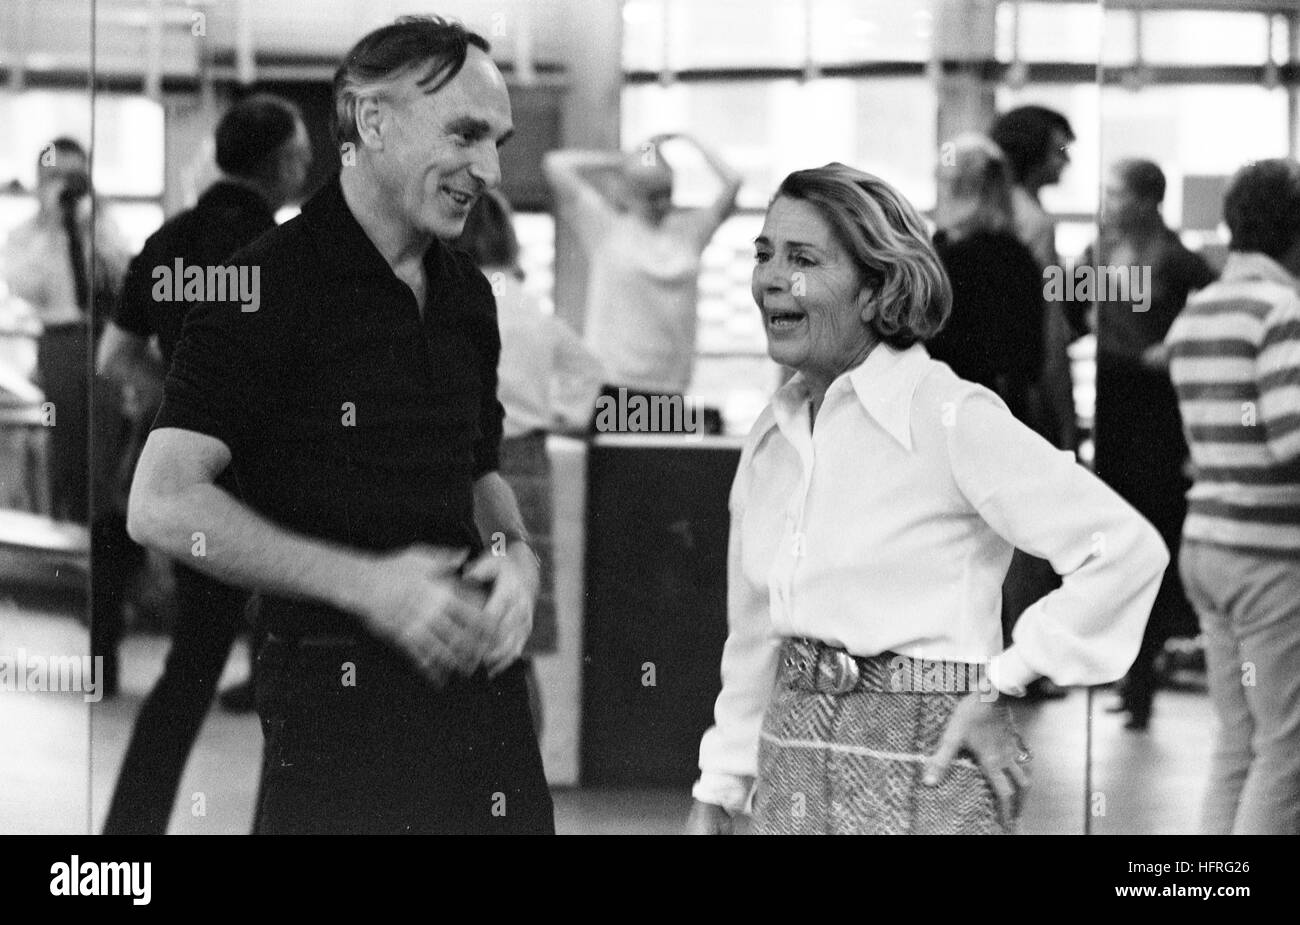 Donald Saddler and Ruby Keeler, during rehearsal for the 1971 production of No, No, Nanette. Stock Photo